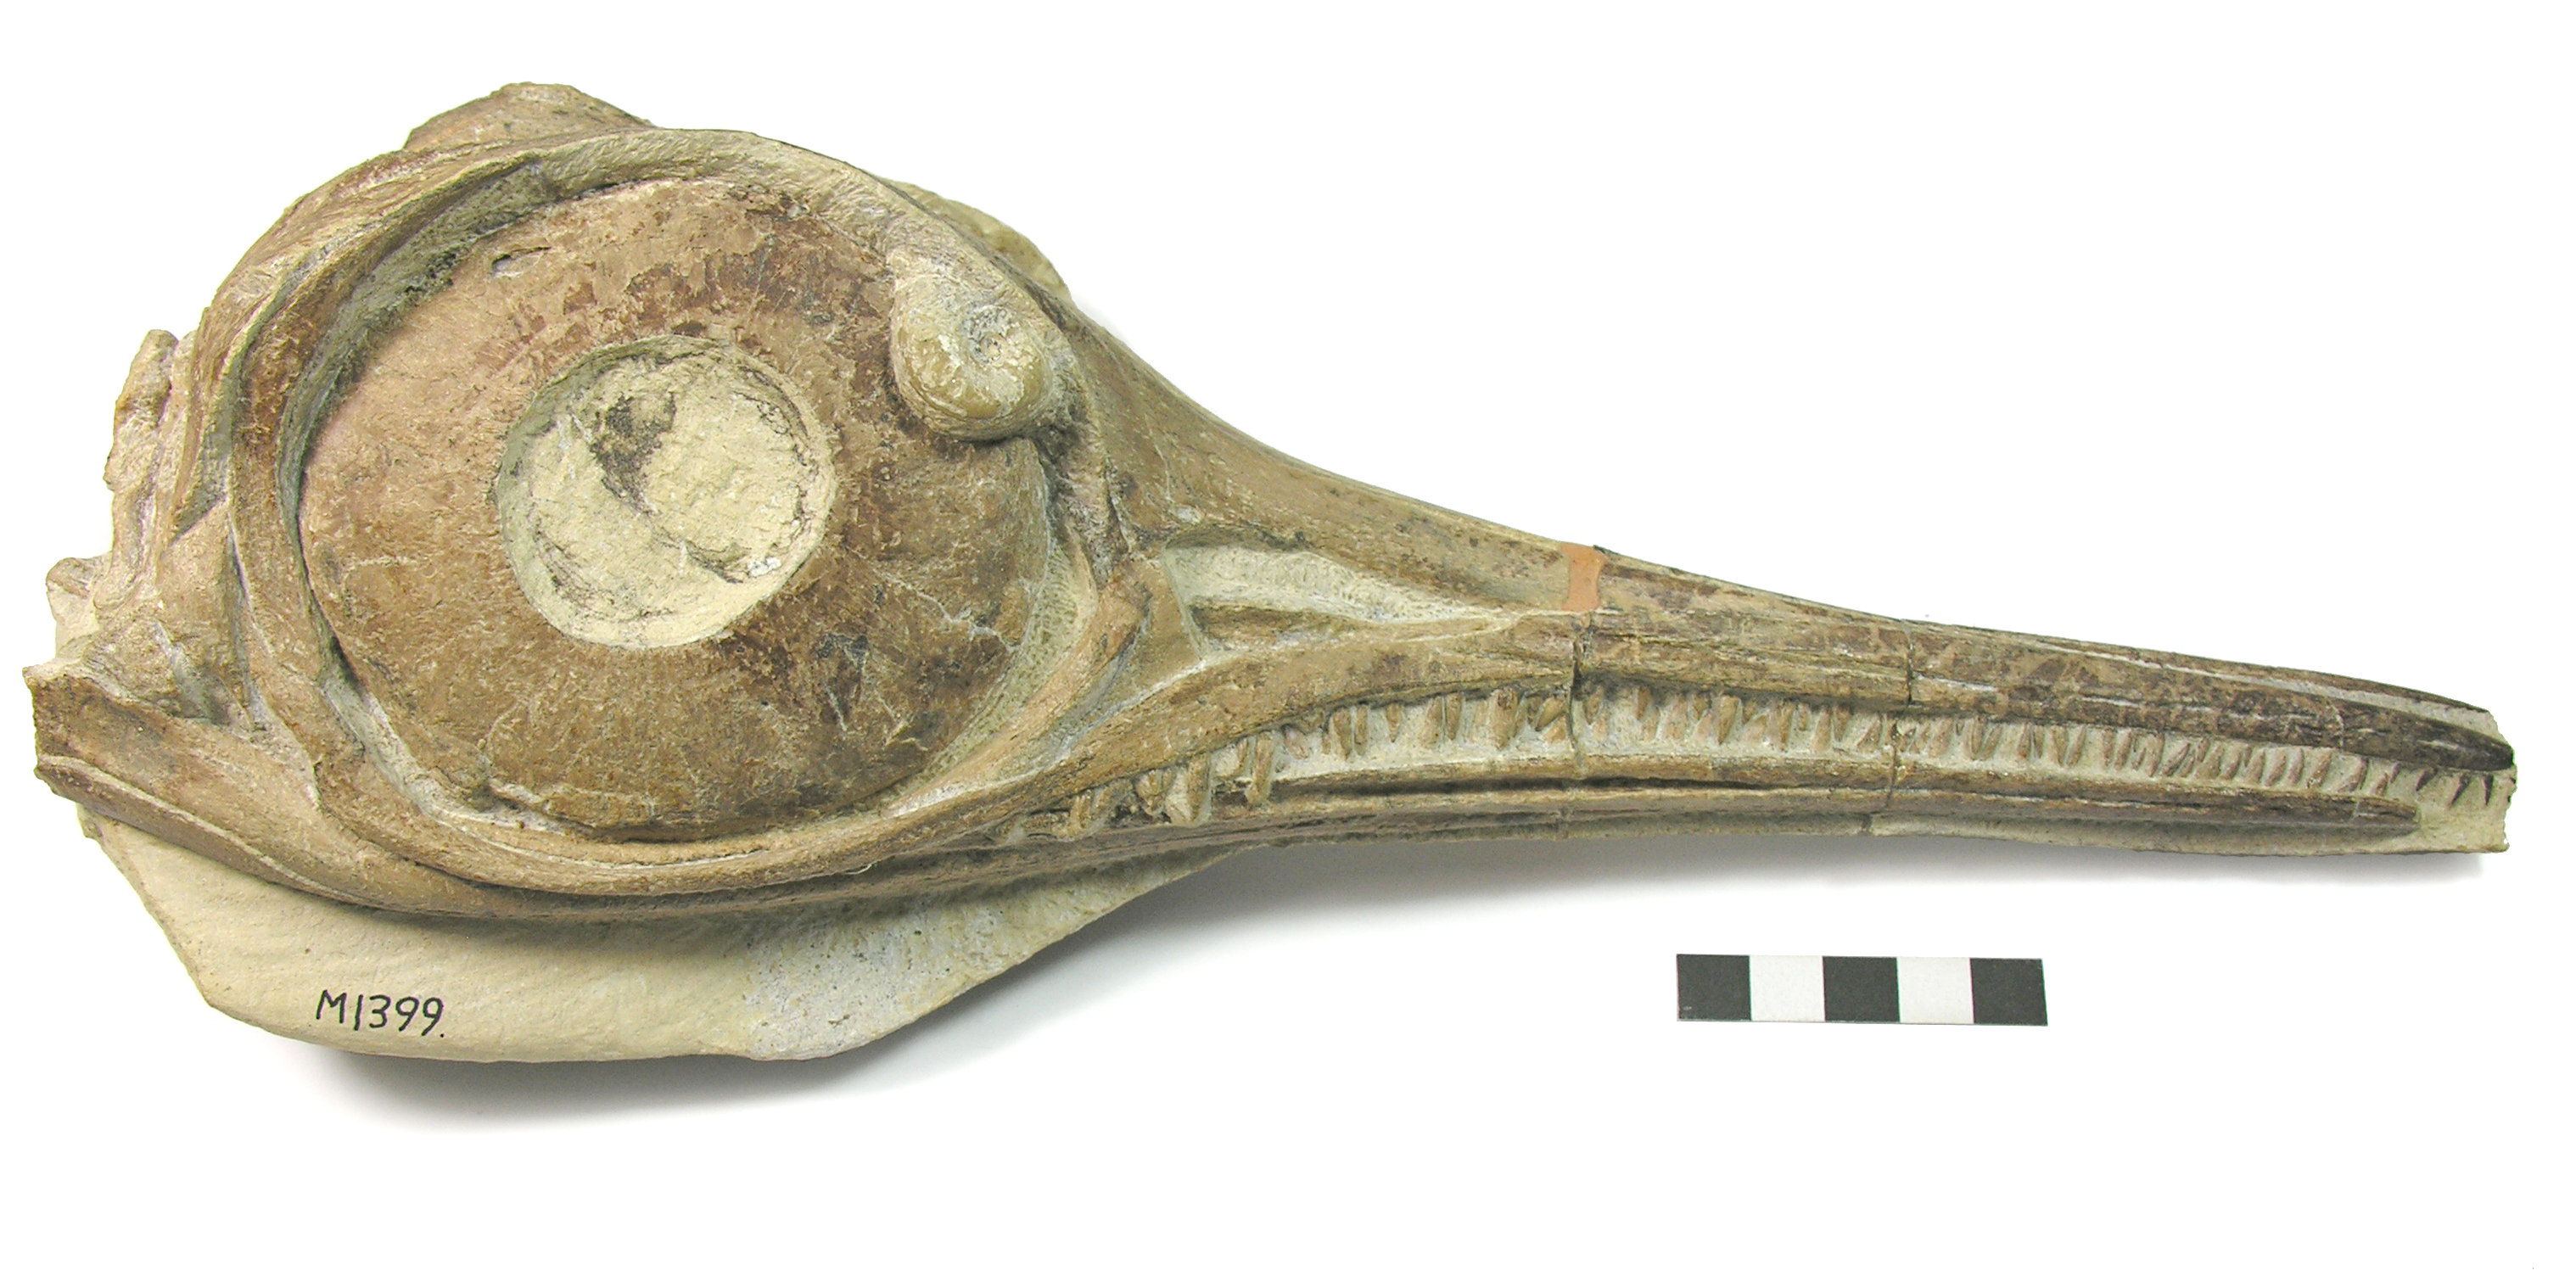 The skull of Ichthyosaurs Hauffiopteryx typicus from the Strawberry Bank Lagerstätt, one of the specimens that were the subject of this study